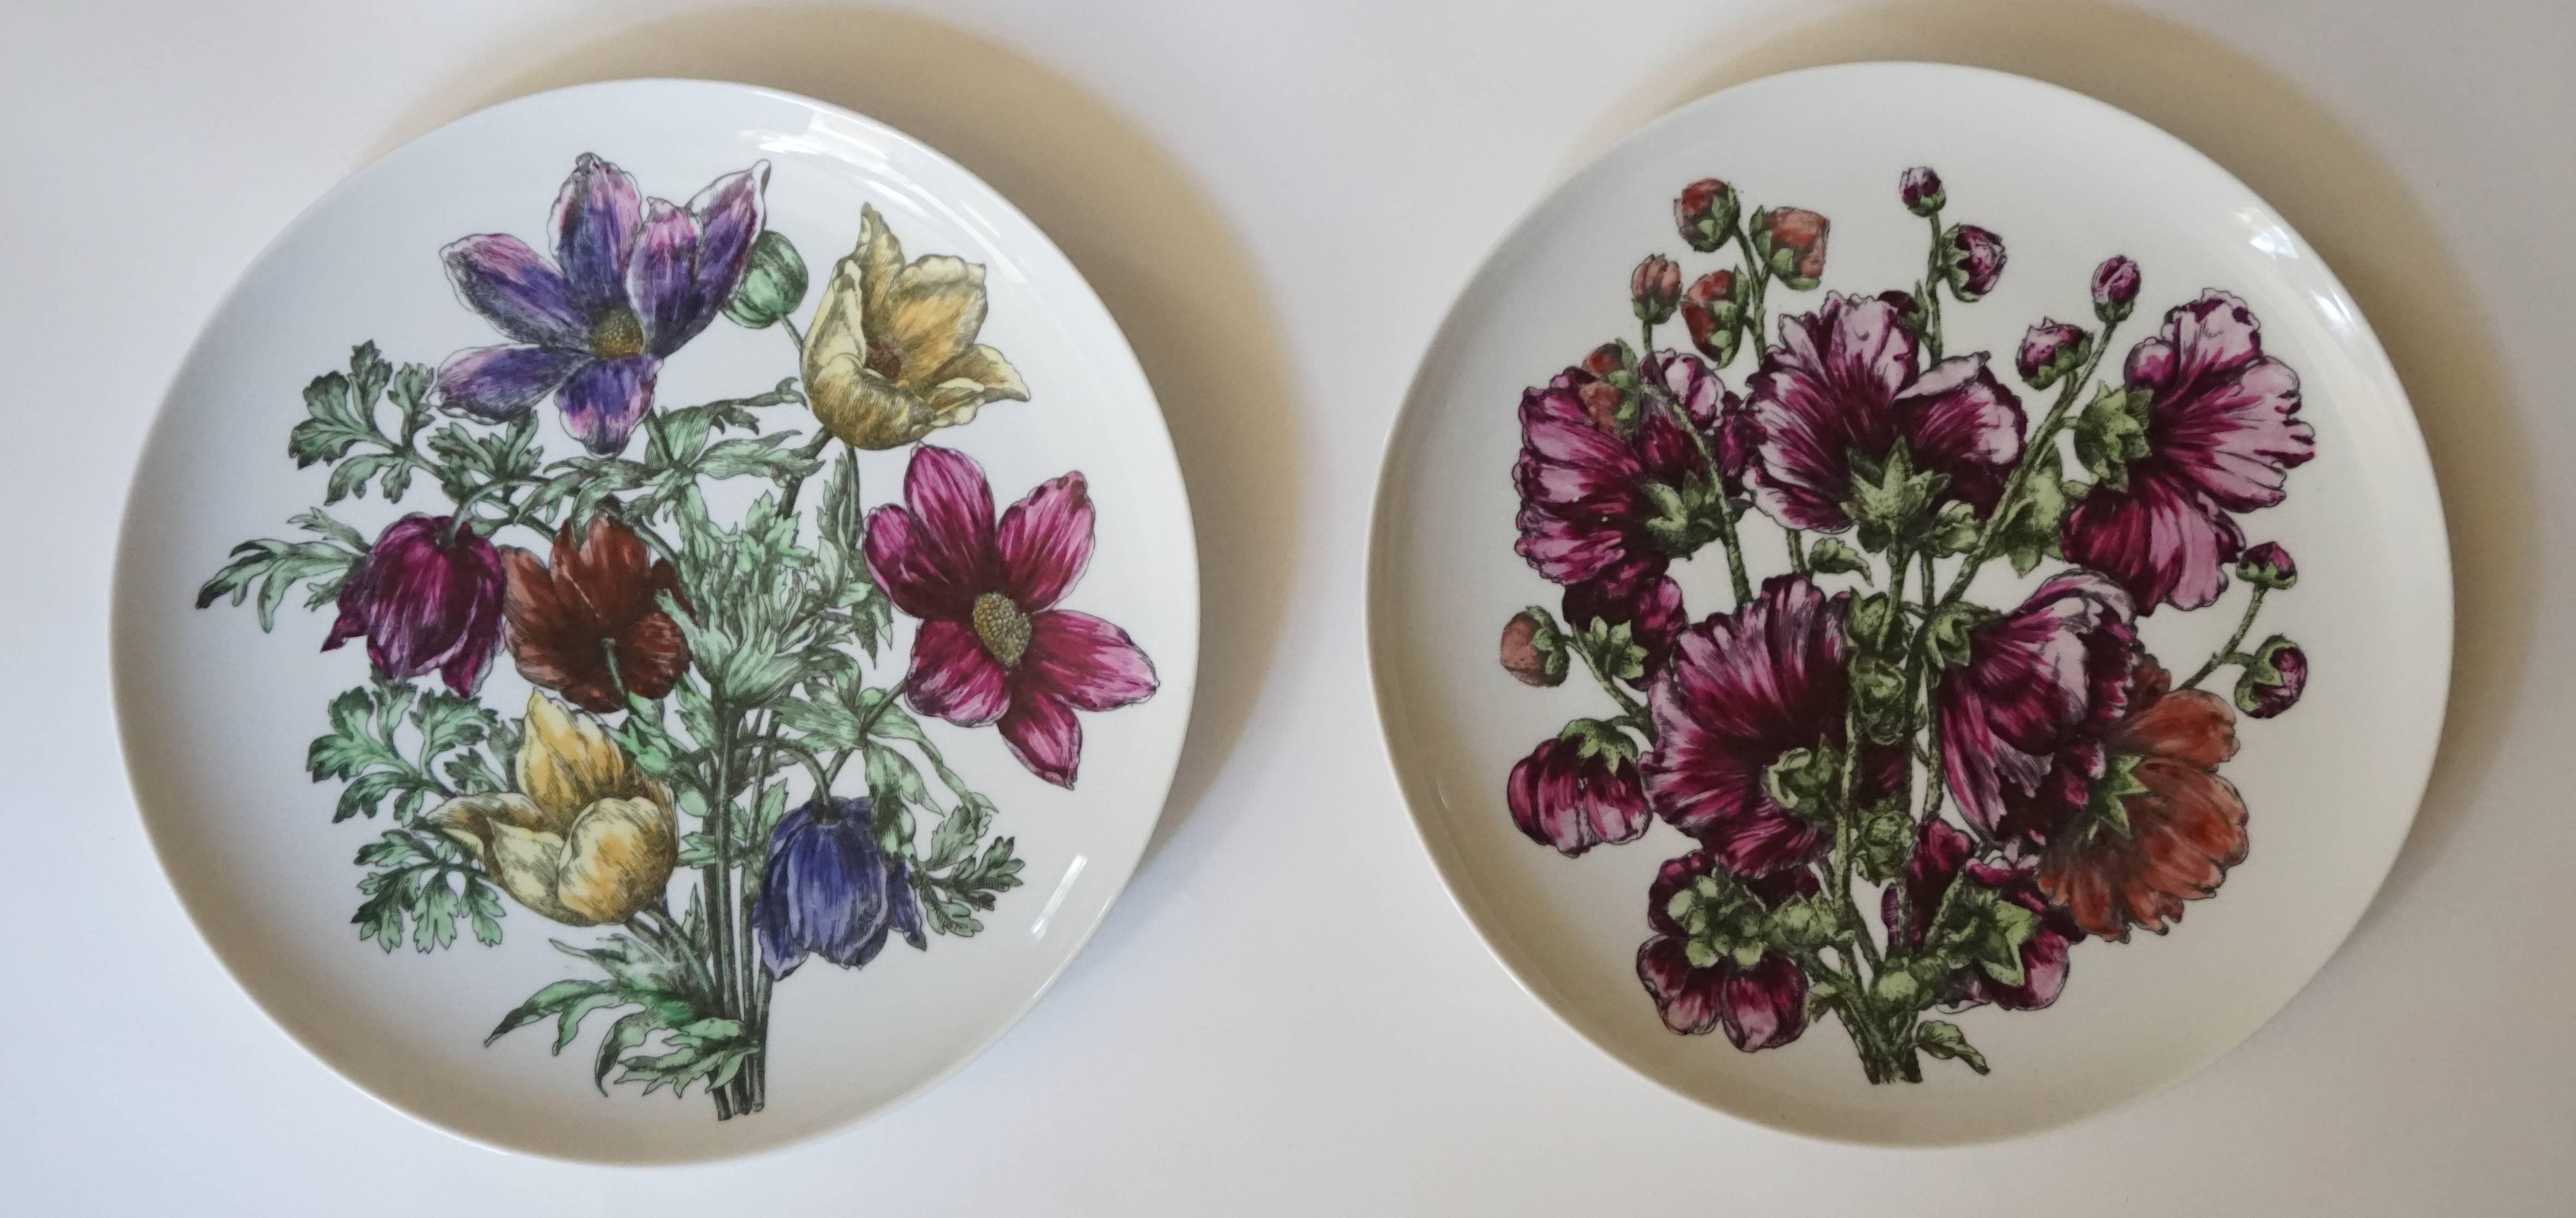 An incredibly rare set of 12 large porcelain dinner plates in the 'Fiori' pattern designed by Piero Fornasetti and produced by Fornasetti - Milano, circa 1965. There are two plates of each design and are marked to the reverse 